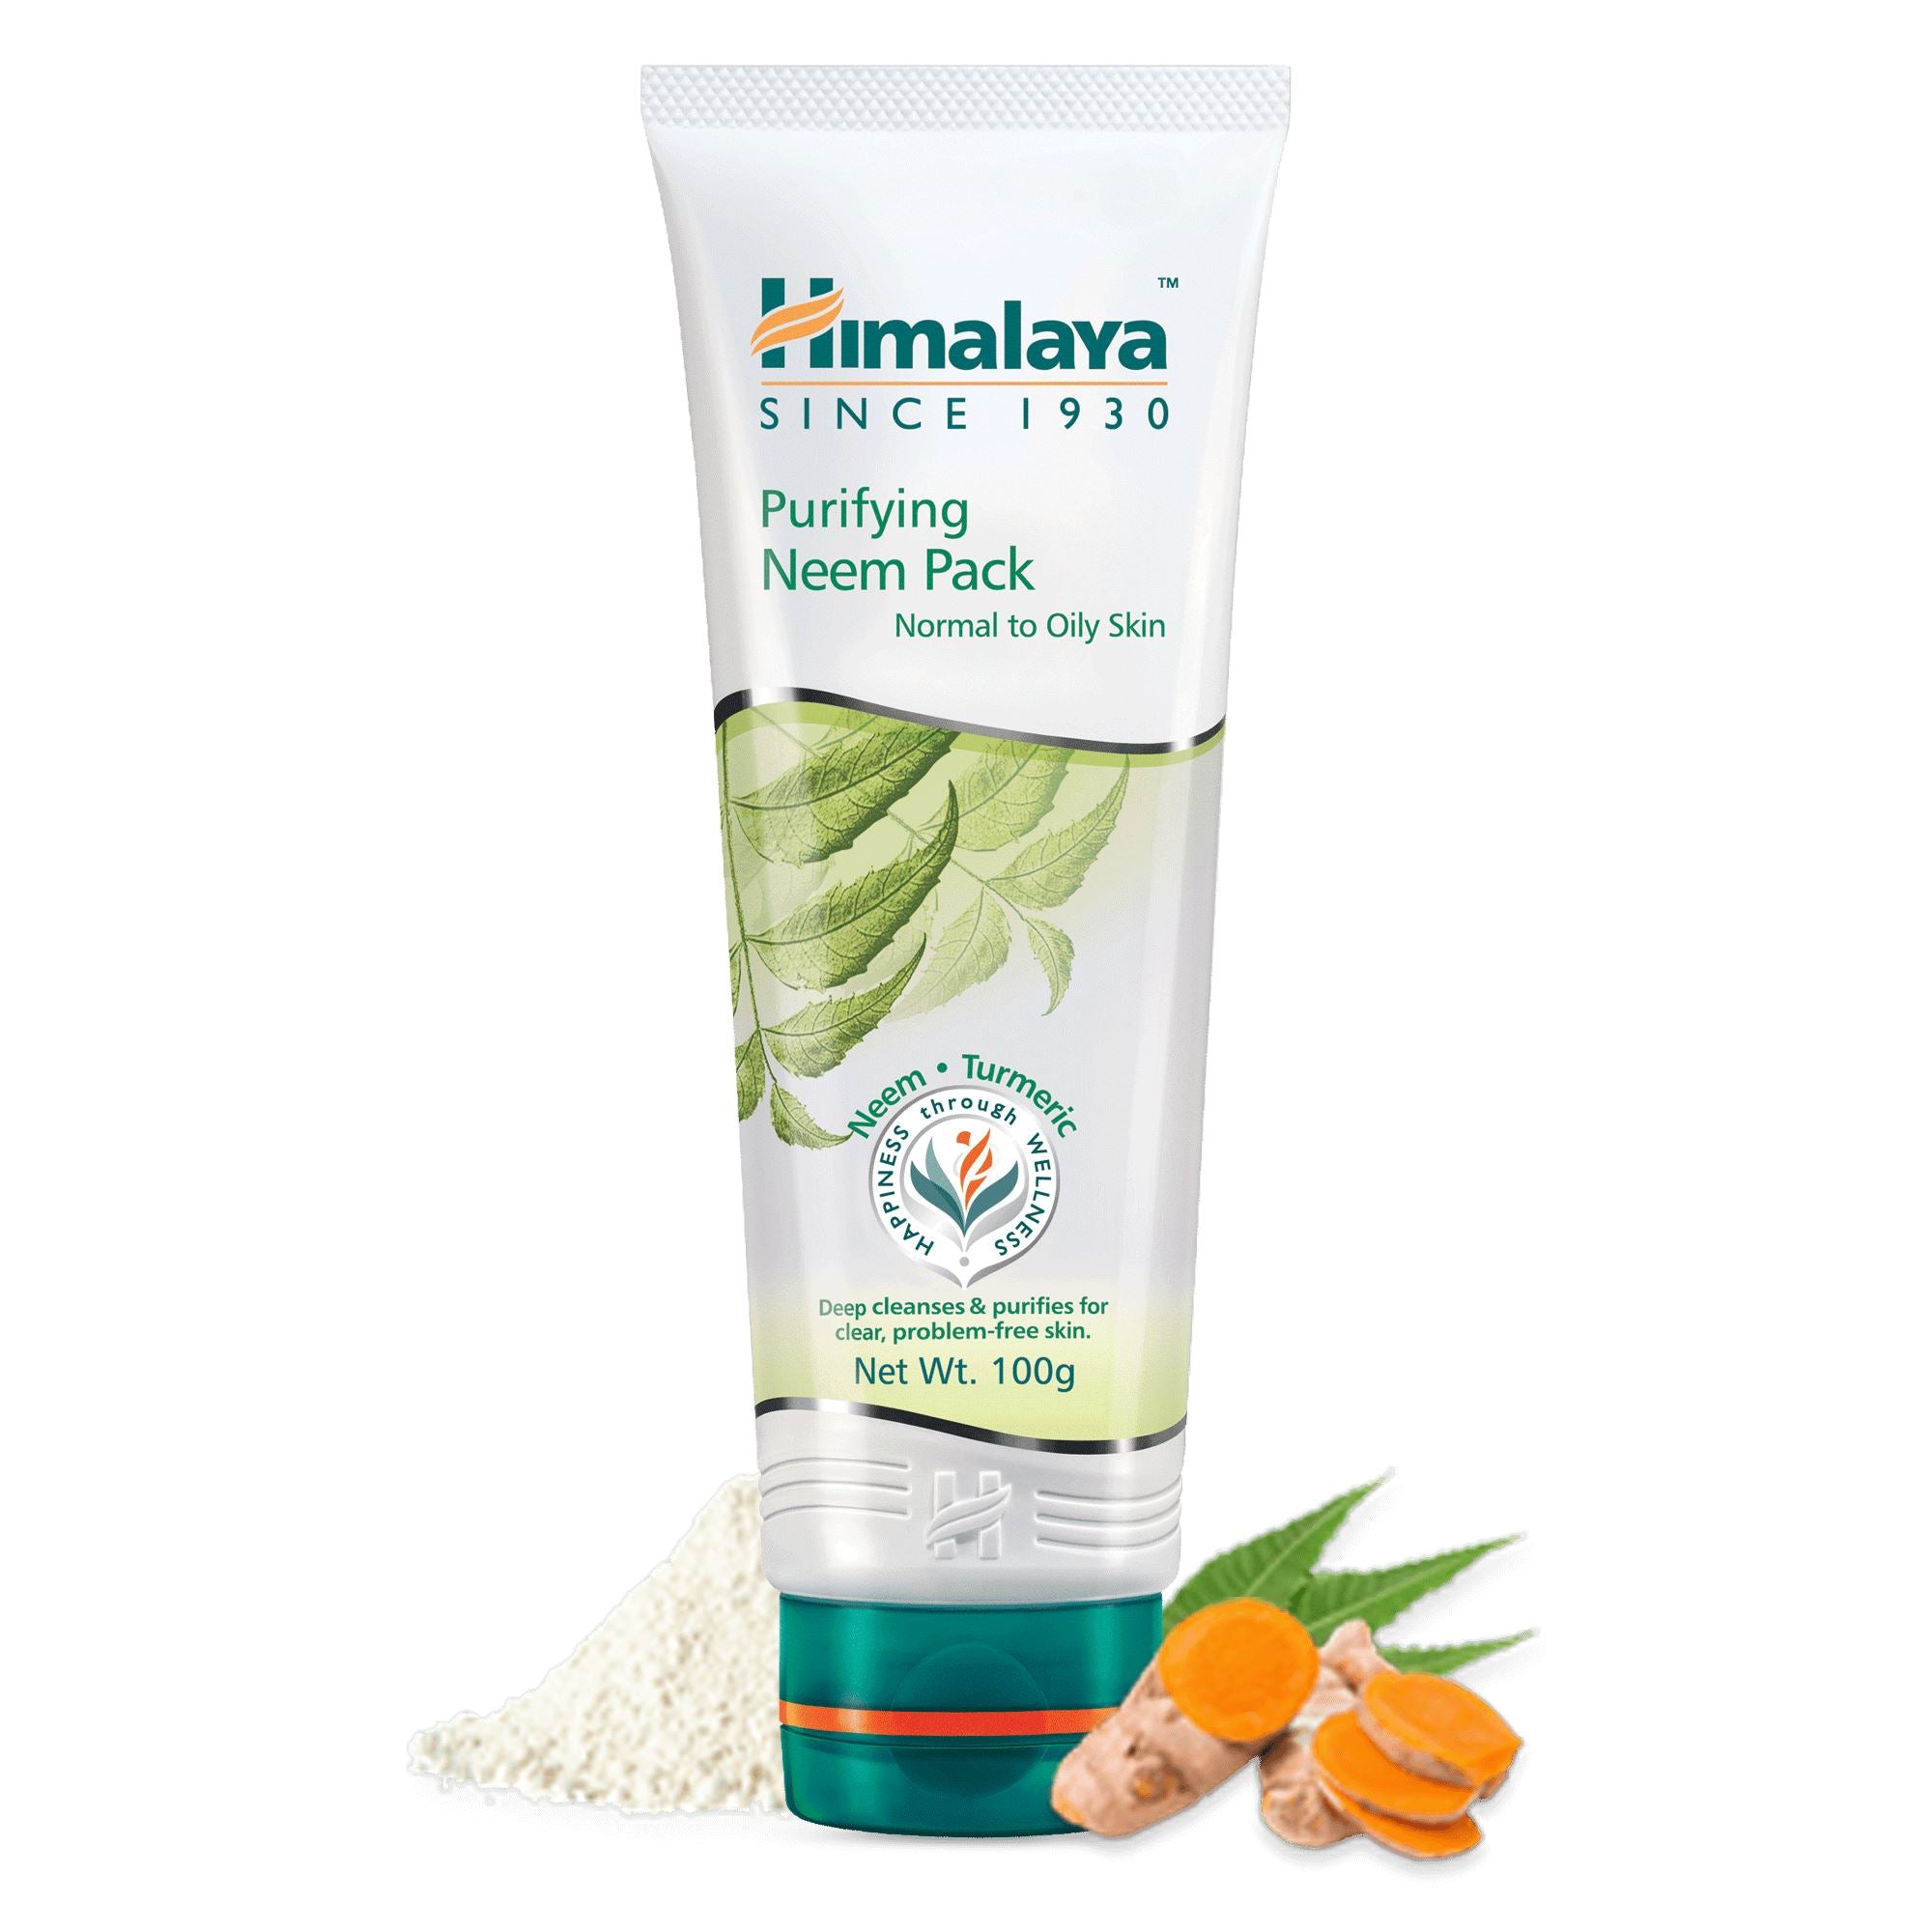 Himalaya Purifying Neem Pack - Deep cleanses & purifies for clear, problem-free skin